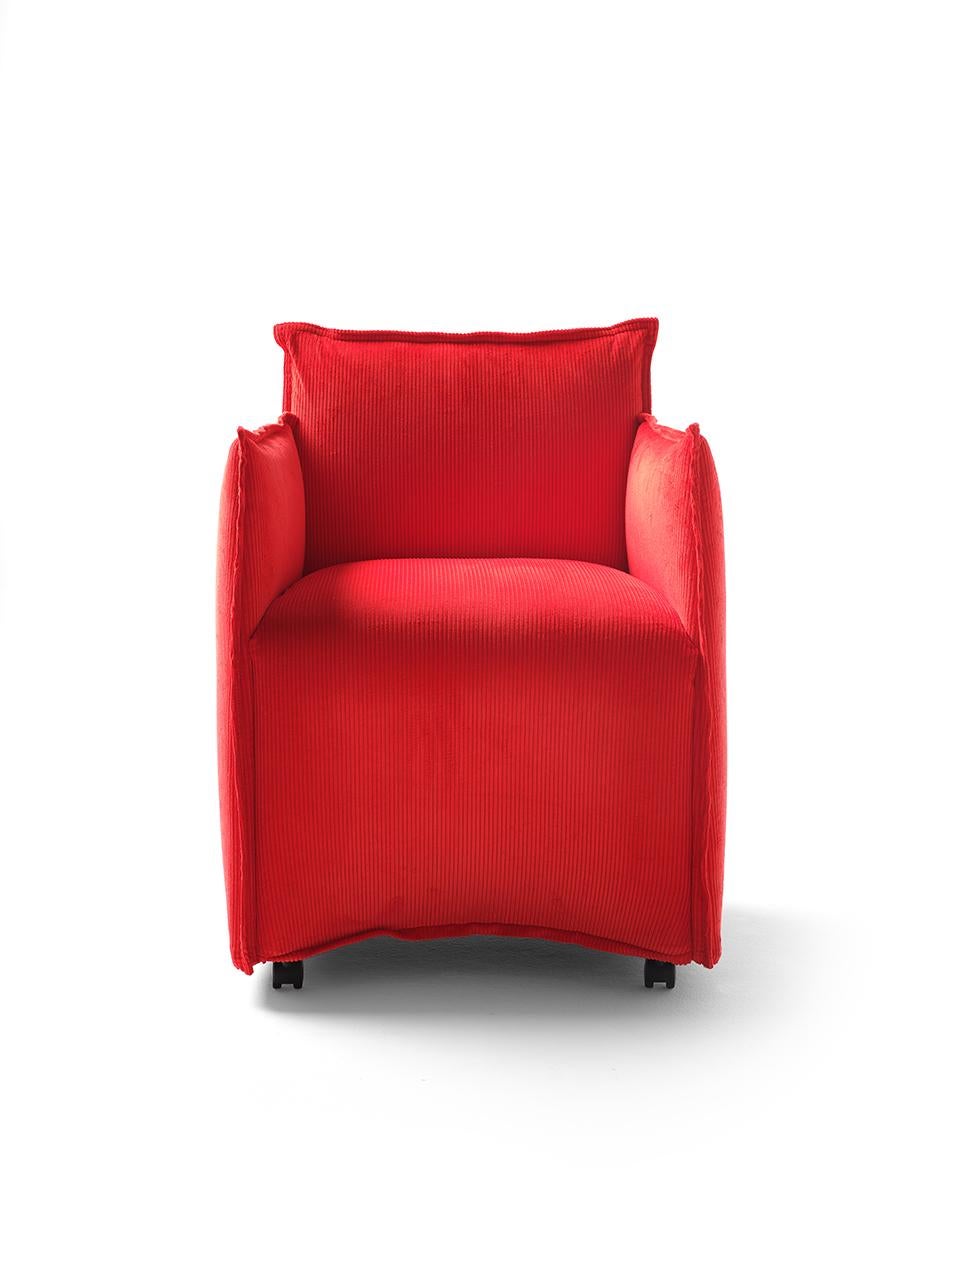 Other 21st Century Modern Small Textile Armchair In Cotton Corduroy  For Sale